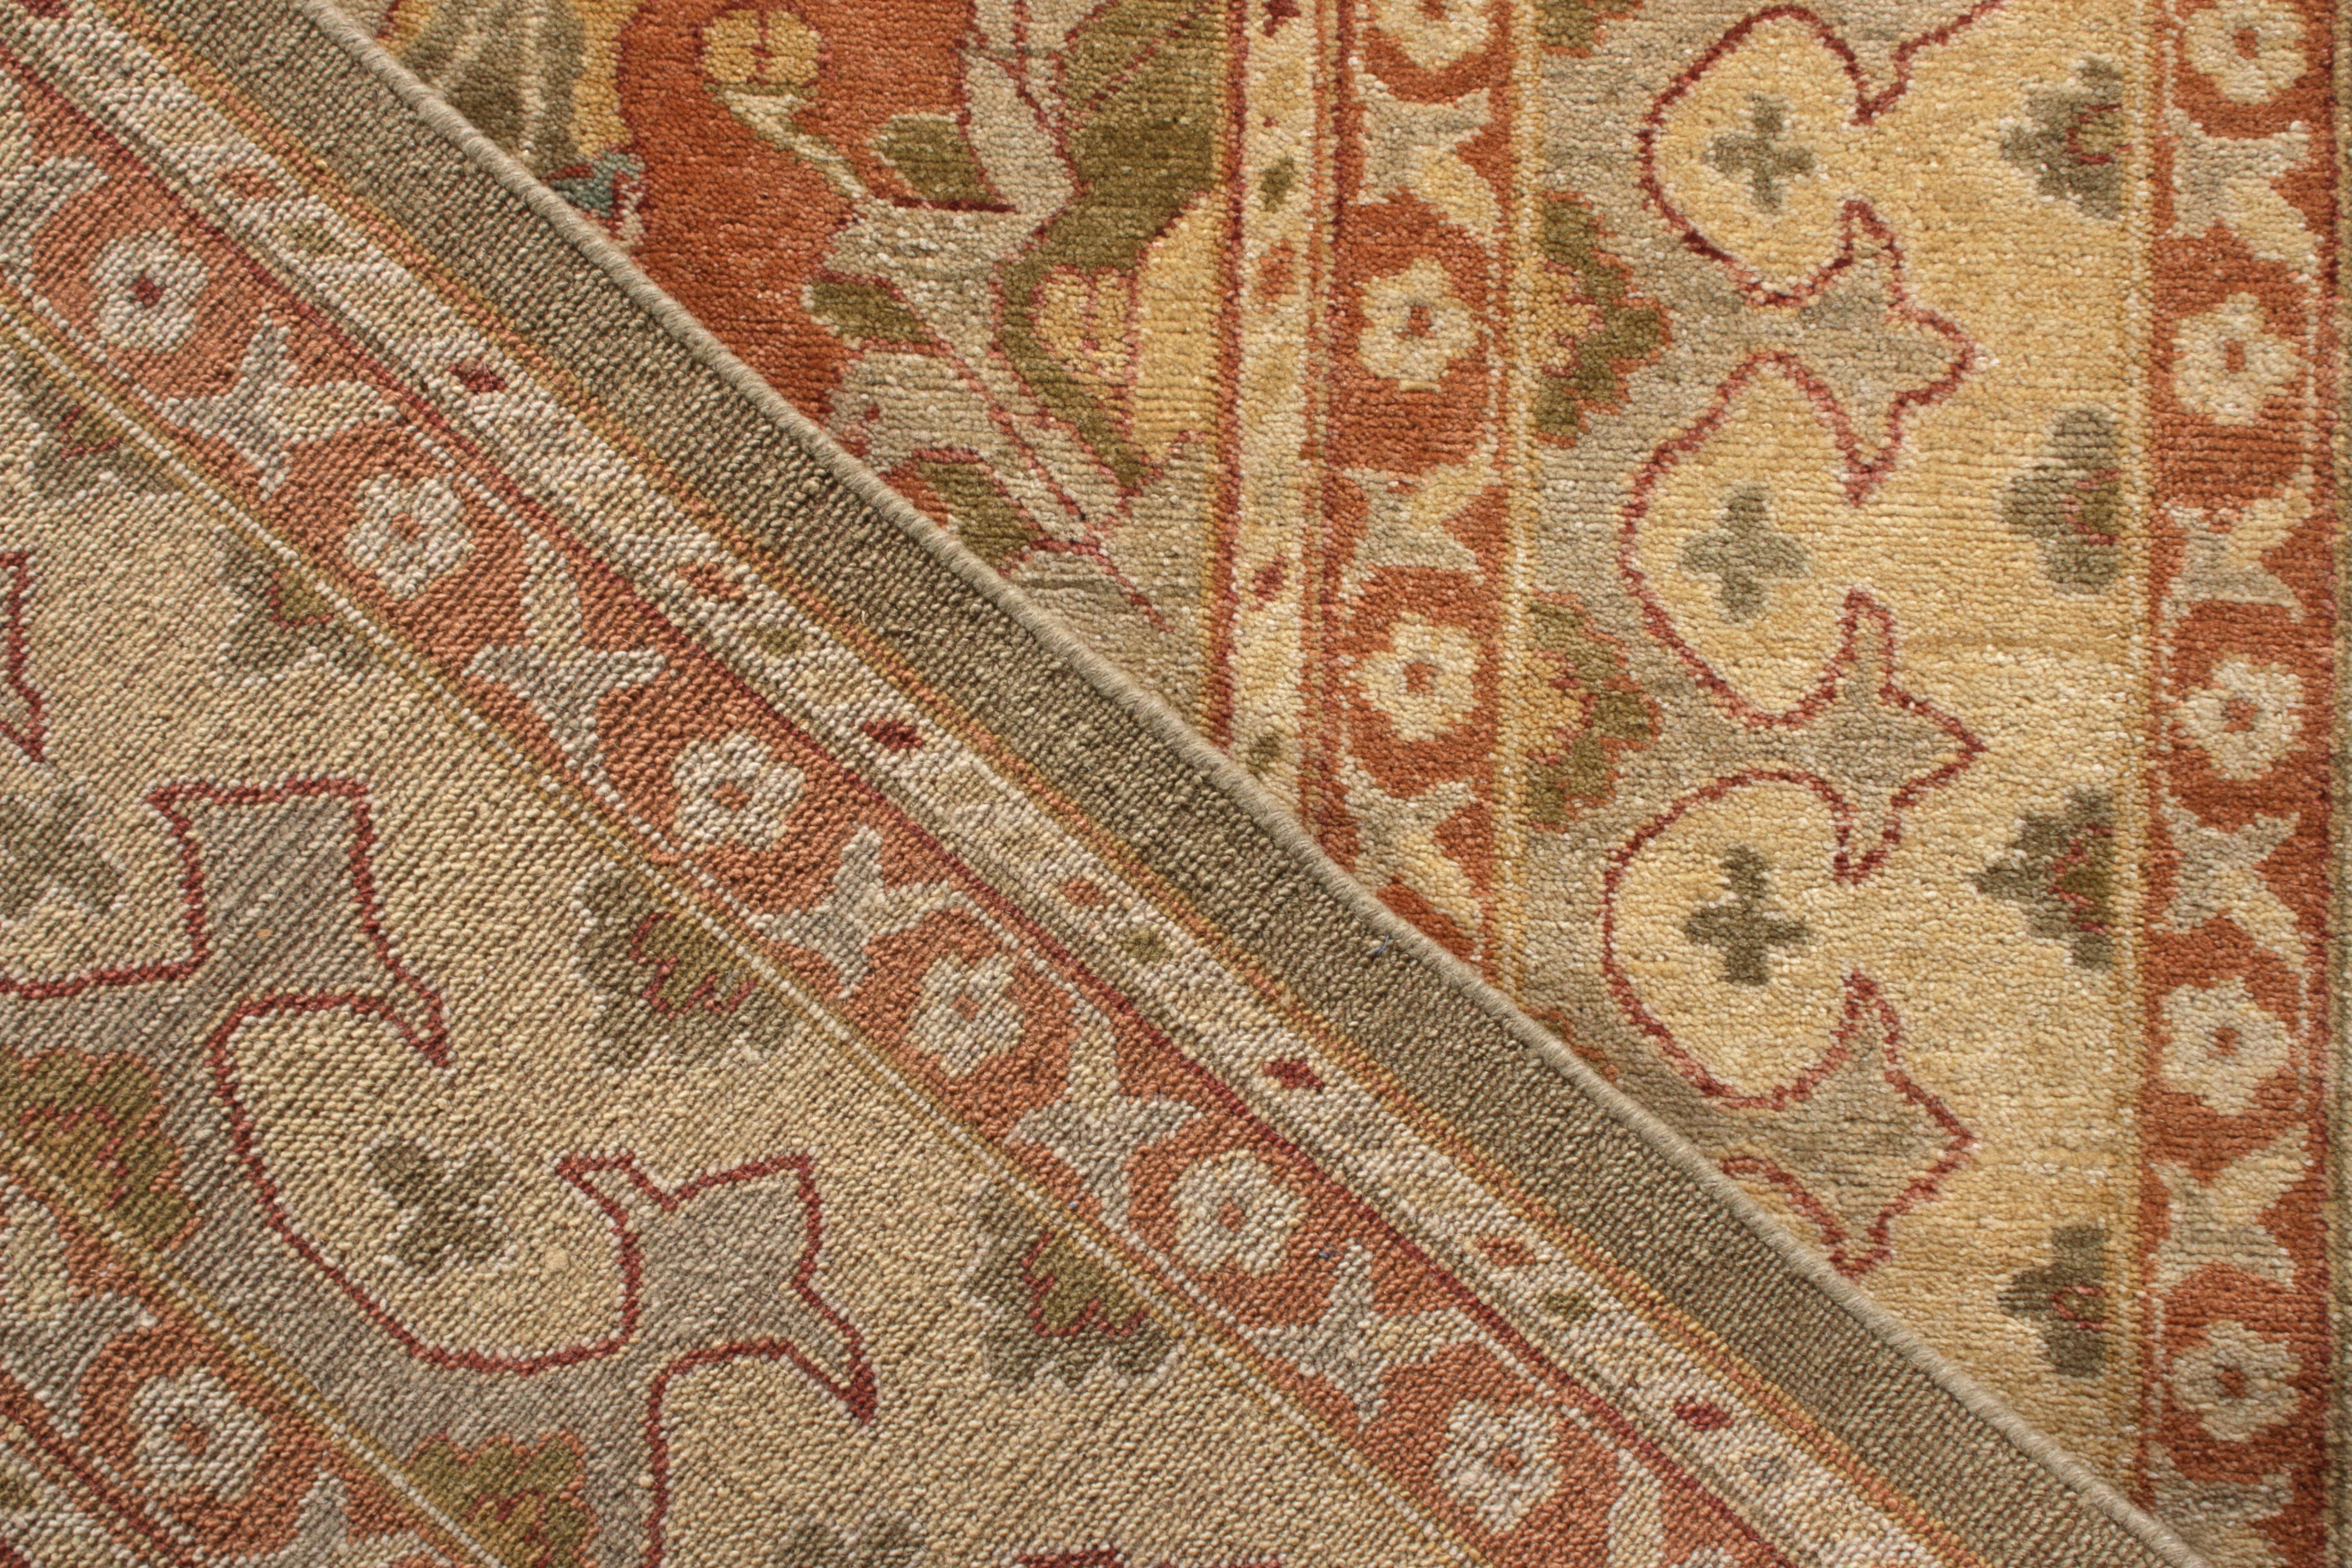 Hand-Knotted Rug & Kilim’s Polonaise Style Rug in Red and Beige-Brown Medallion Pattern For Sale